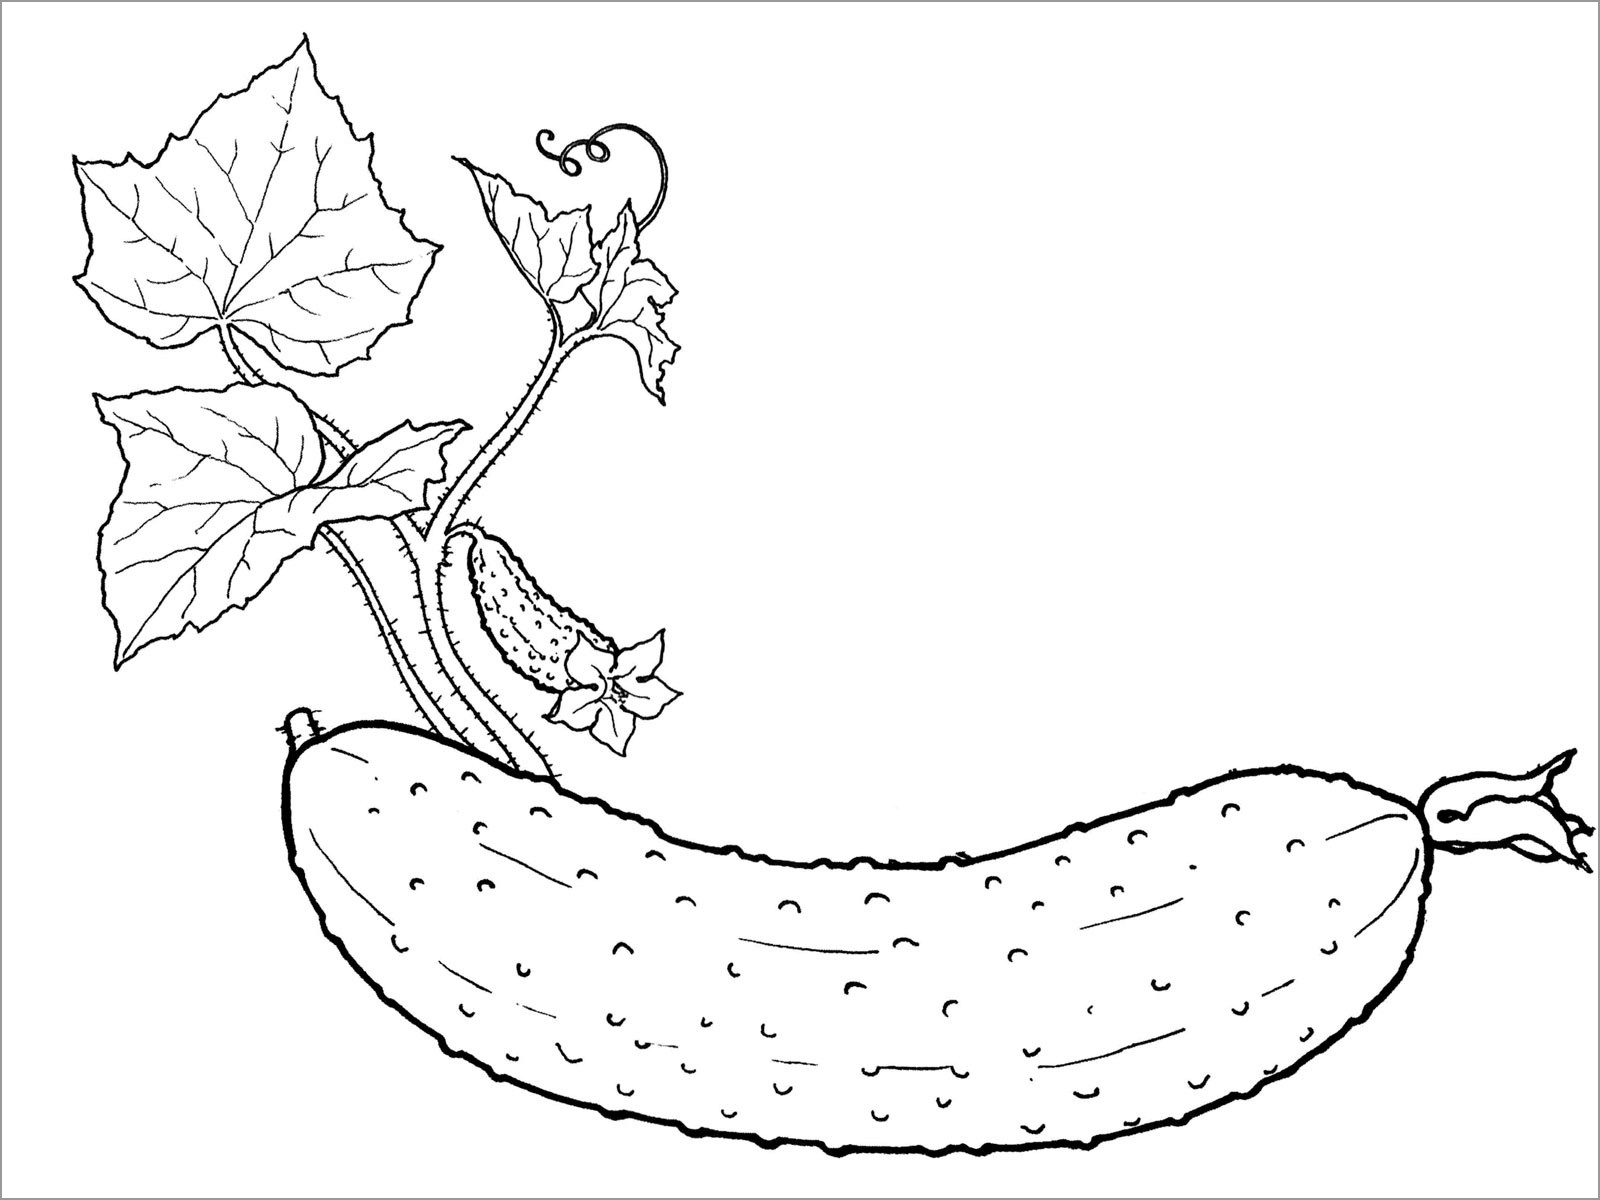 Realistic Cucumbers Coloring Page - ColoringBay